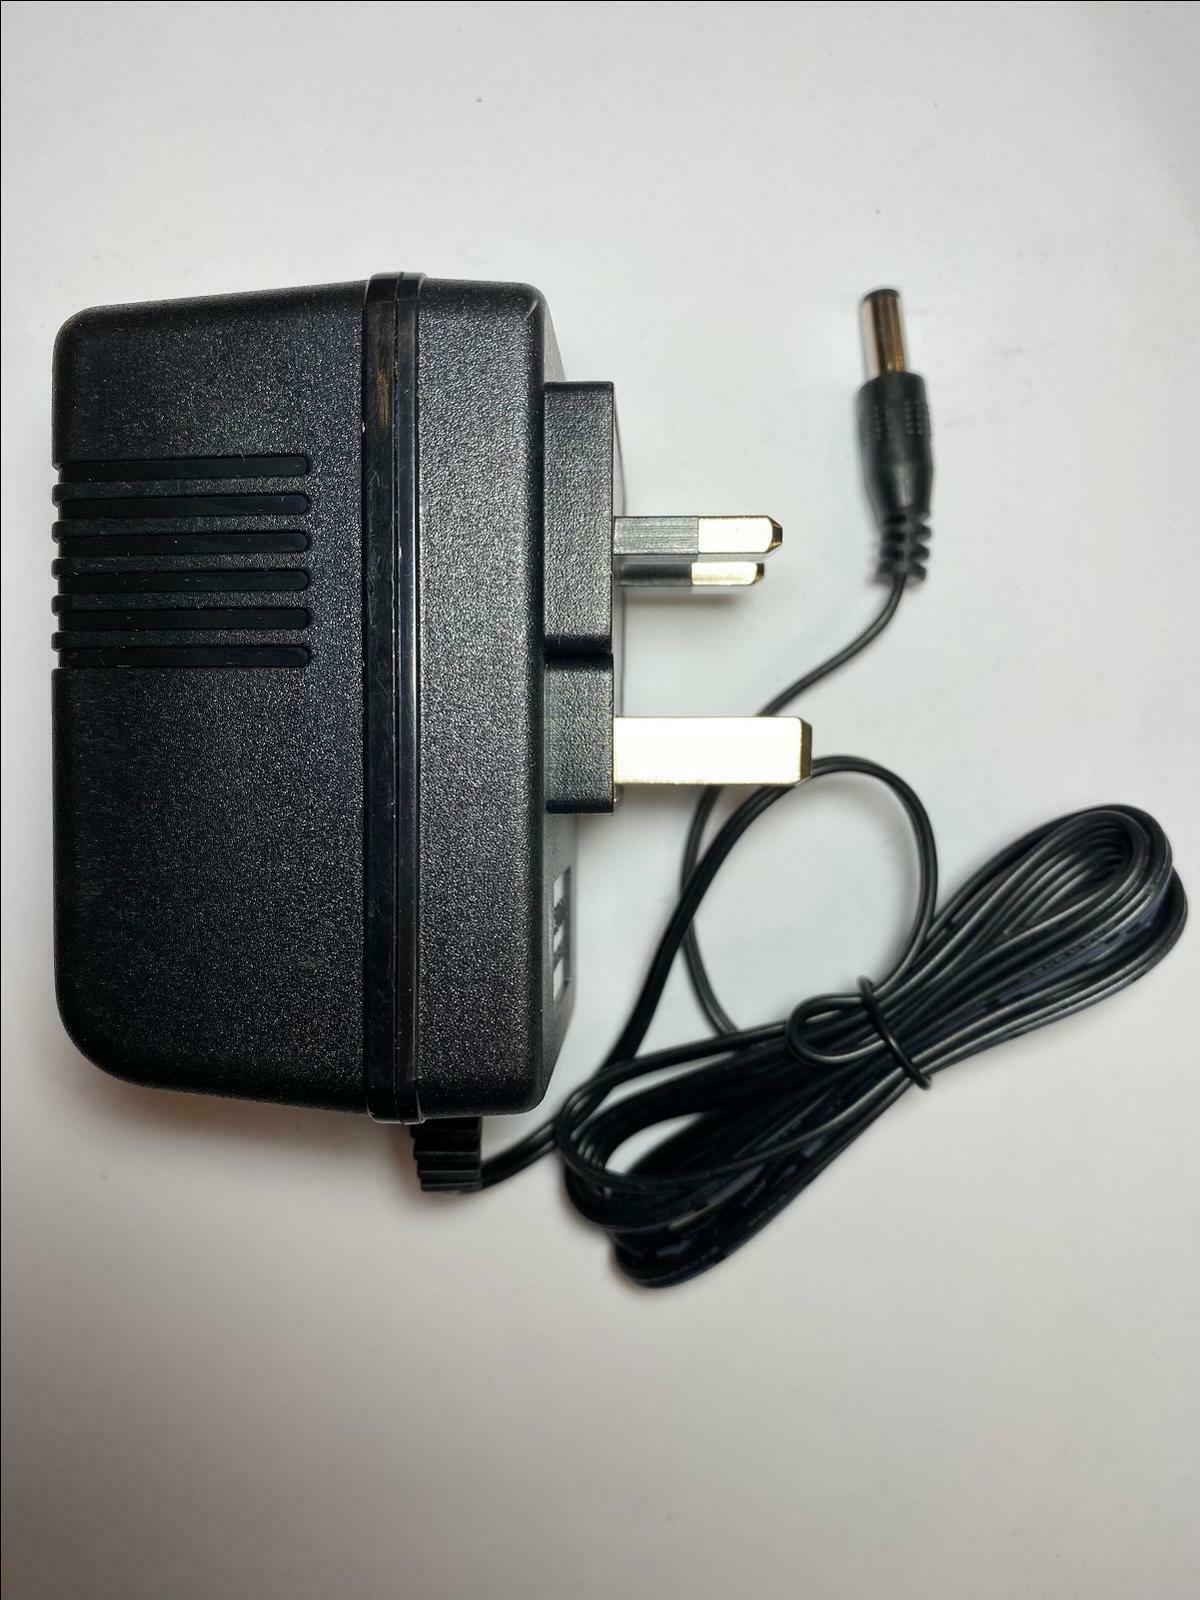 15v 5.4w EU Plug AC Power Charger Adapter W/Cable For Philips Norelco Shaver Razor HQ8505 Model: HQ8500 Type: Philips N